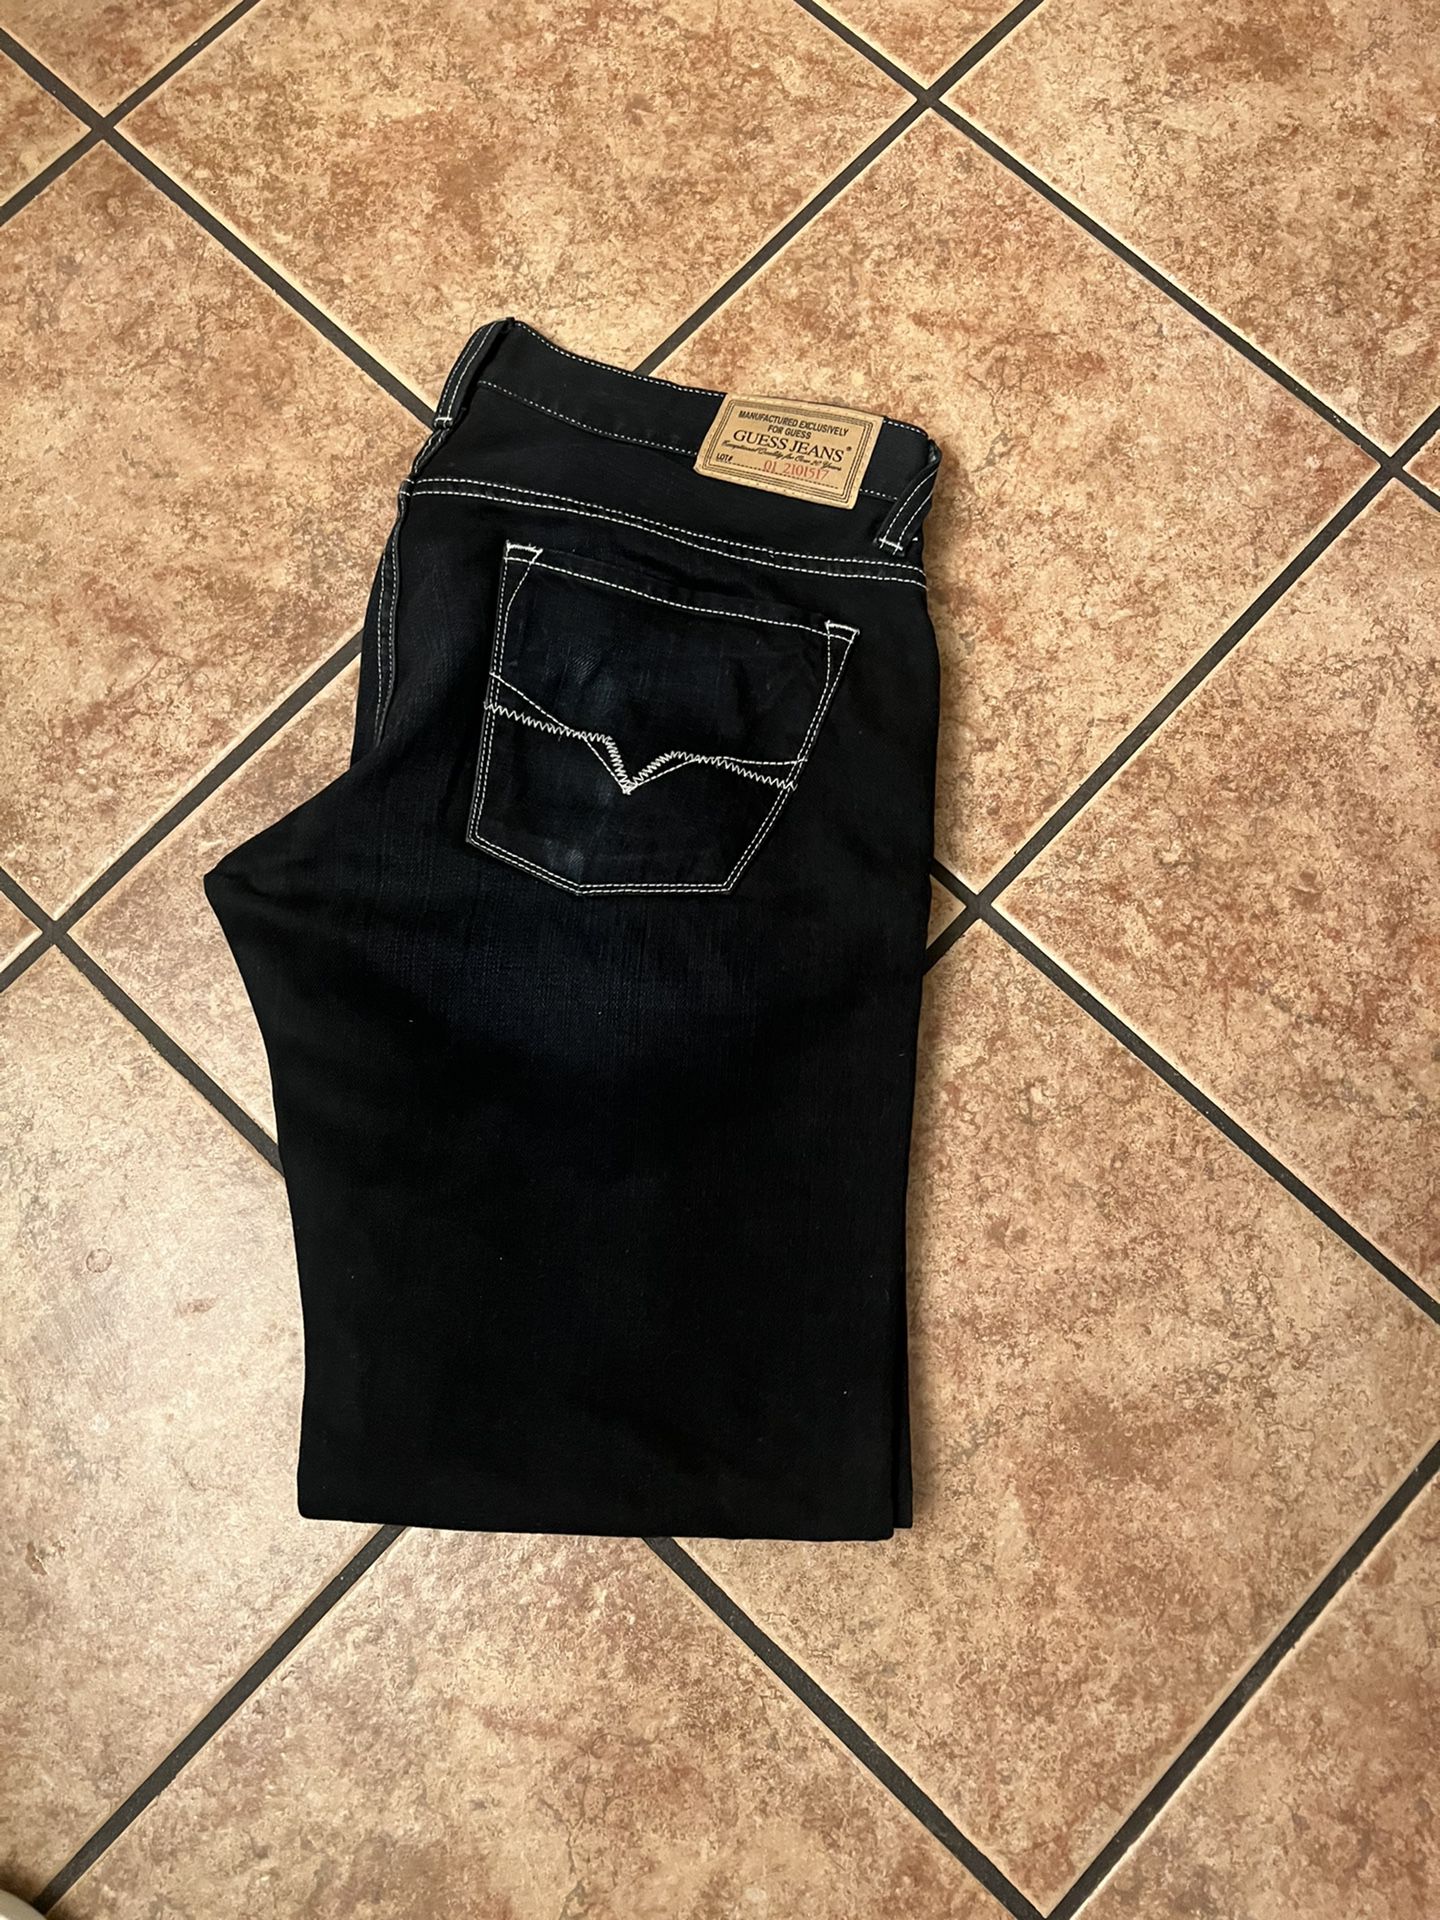 Mens Jean’s Guess Size 32x32 